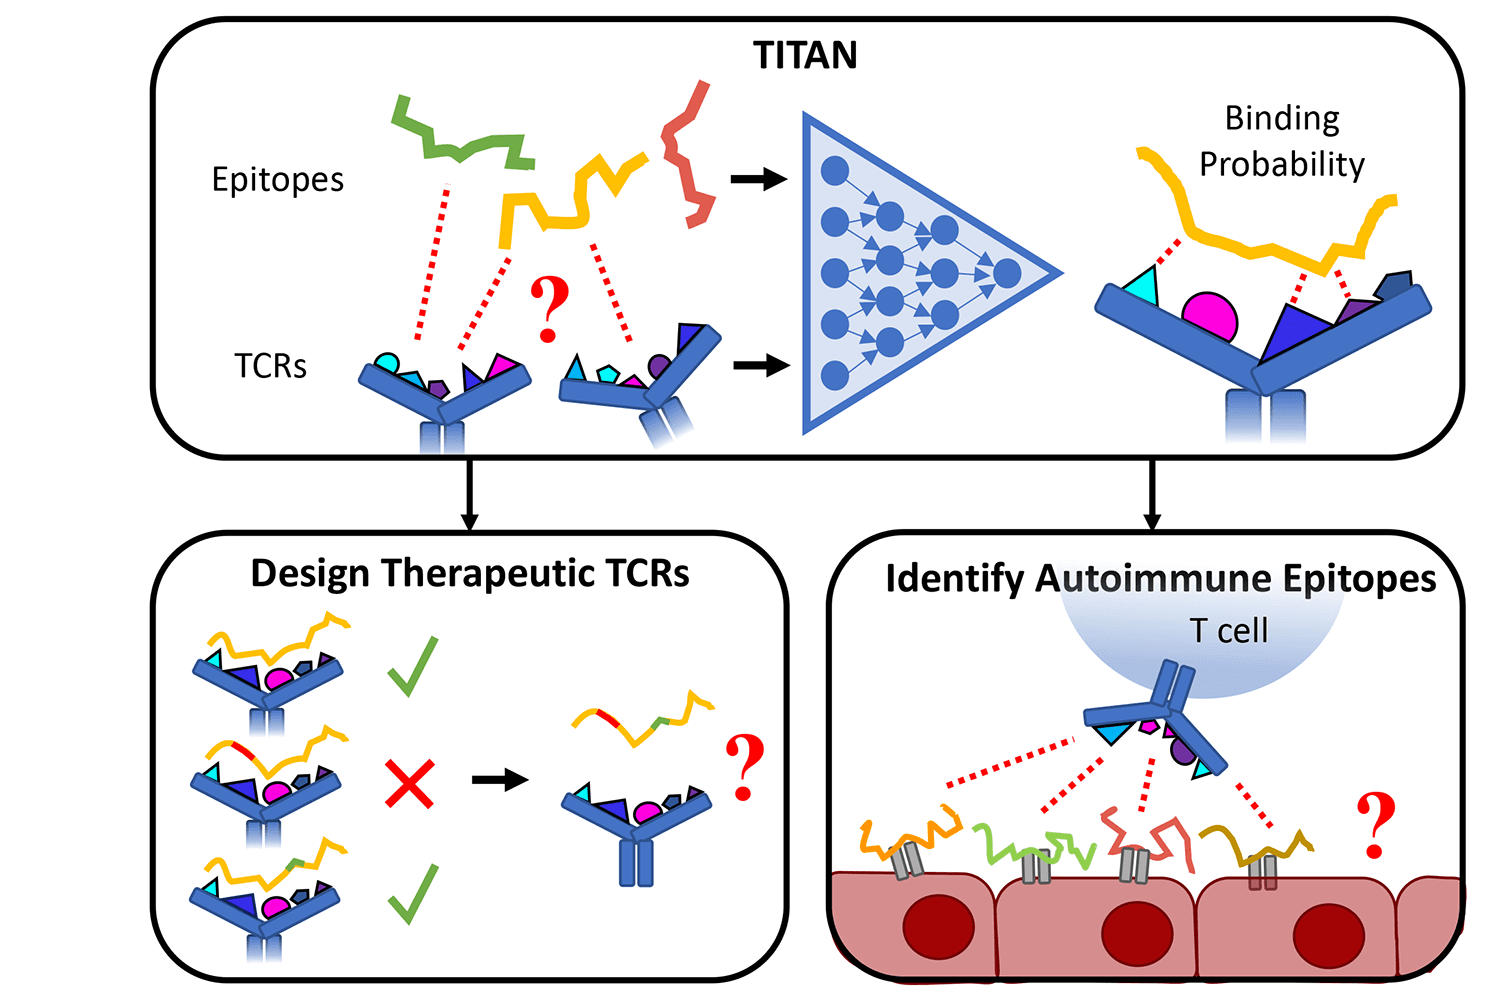 How TITAN predicts T cell receptor specificity.